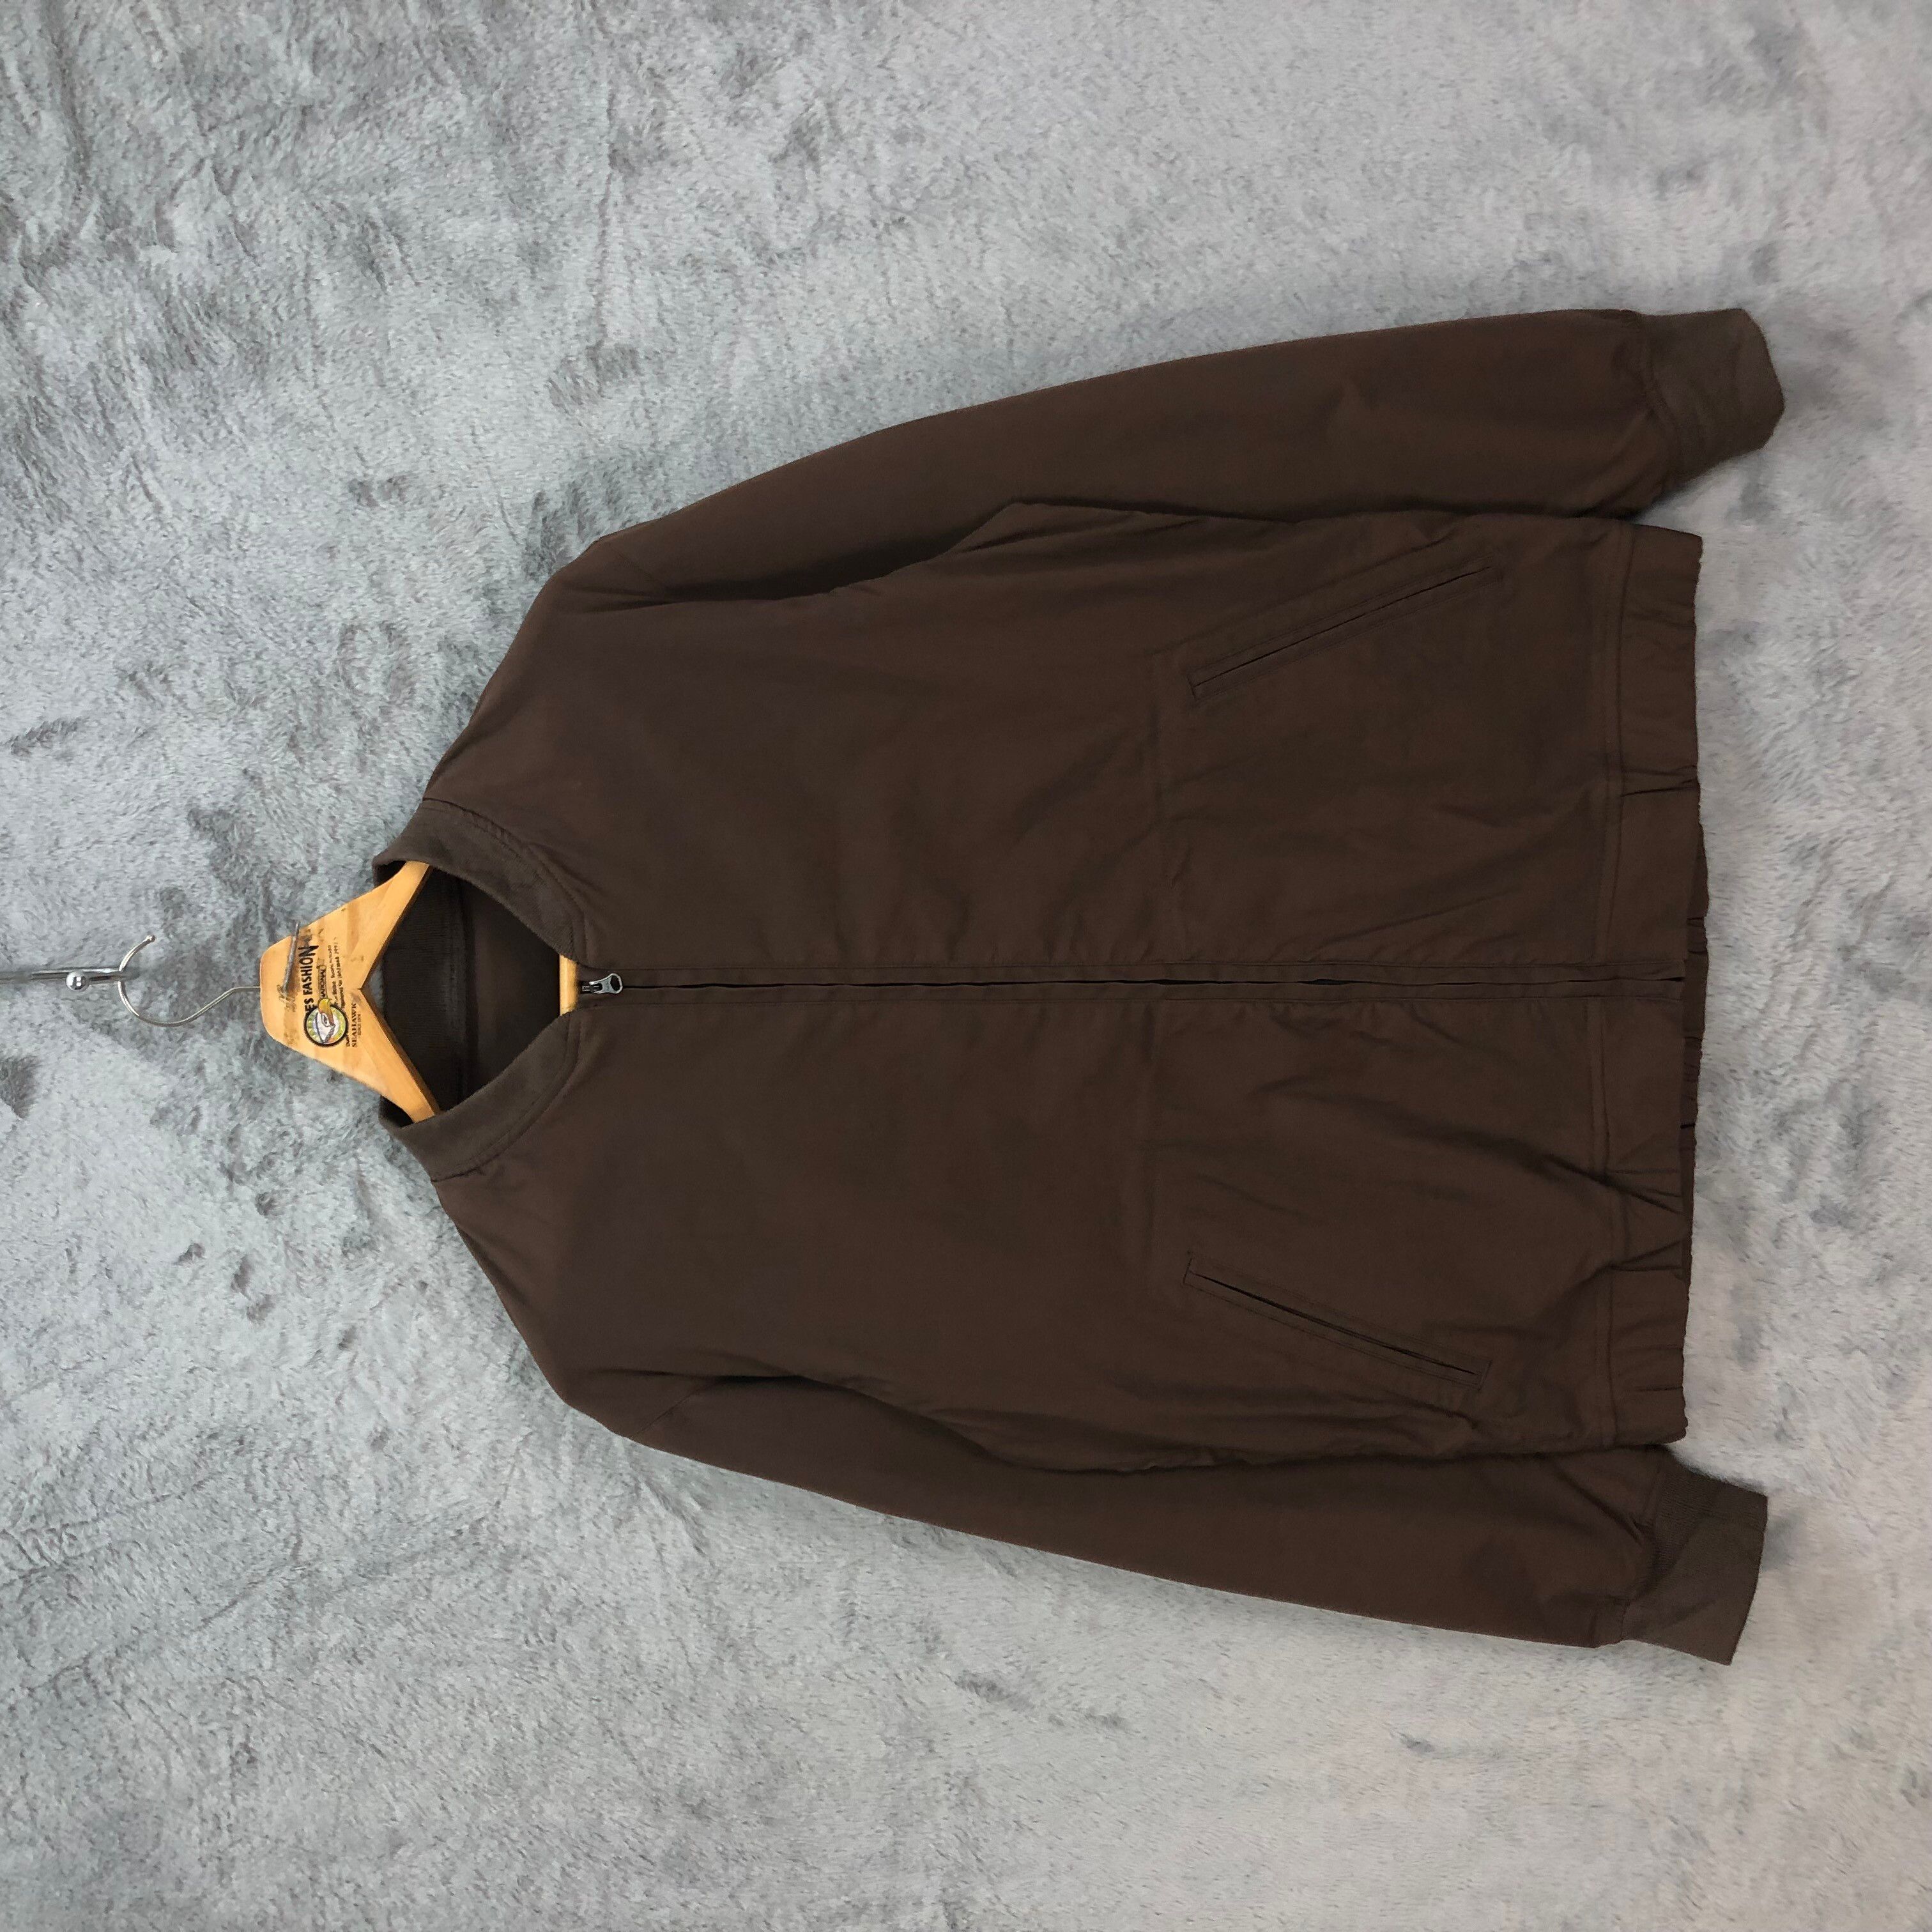 GREEN LABEL RELAXING United Arrows All Brown Bomber 5167-177 - 1